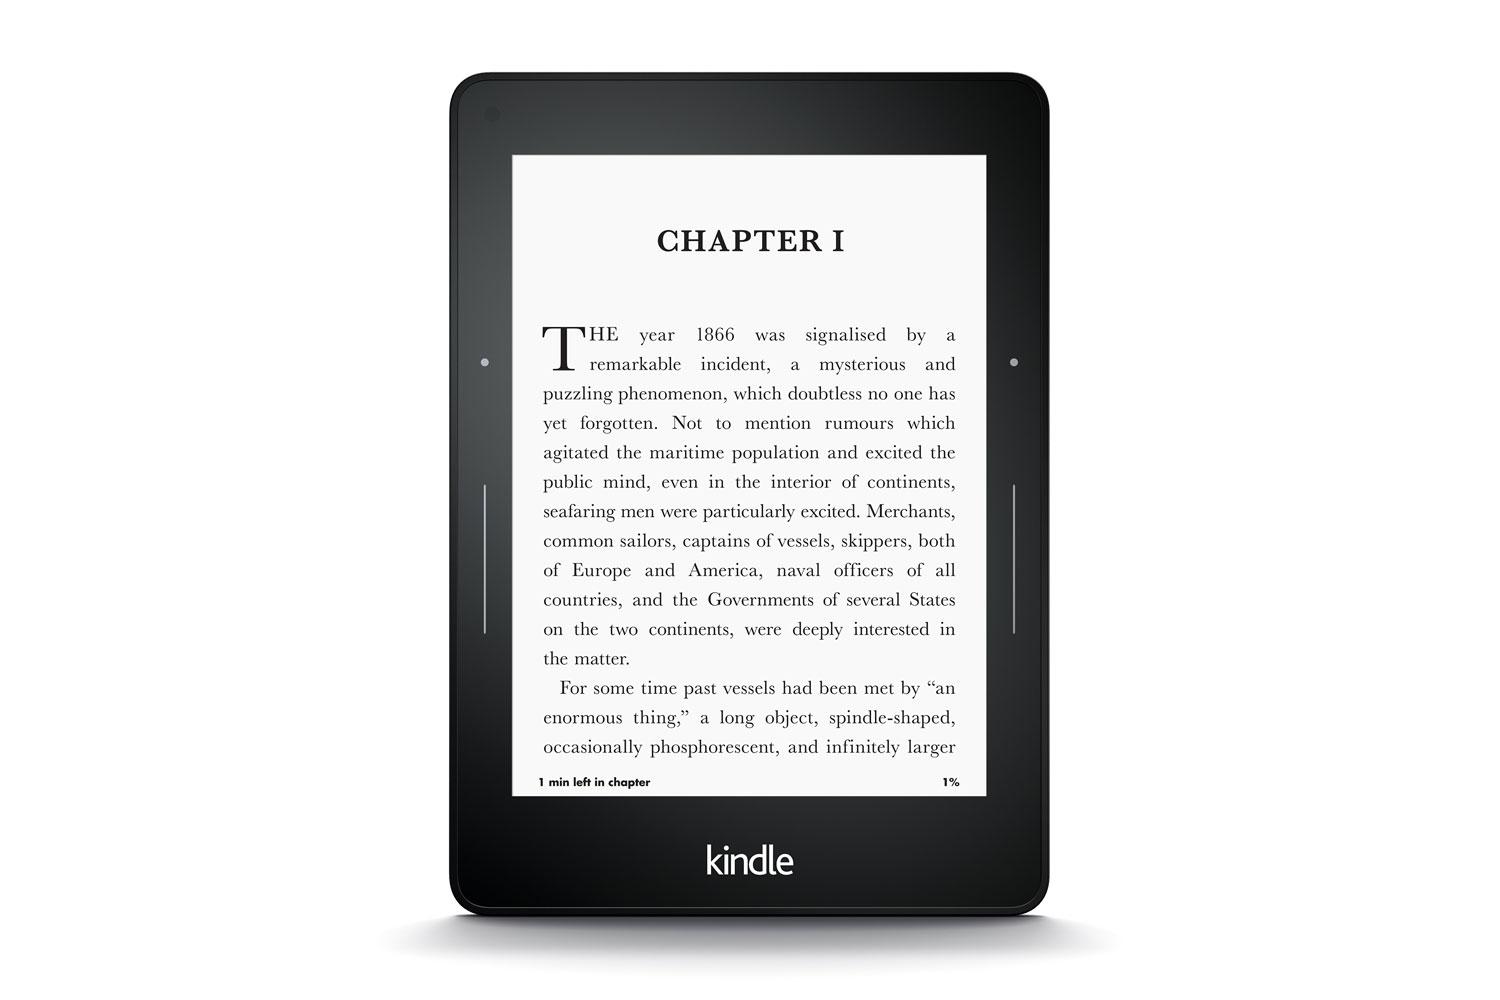 amazon launches high end voyage e reader kindle front press image